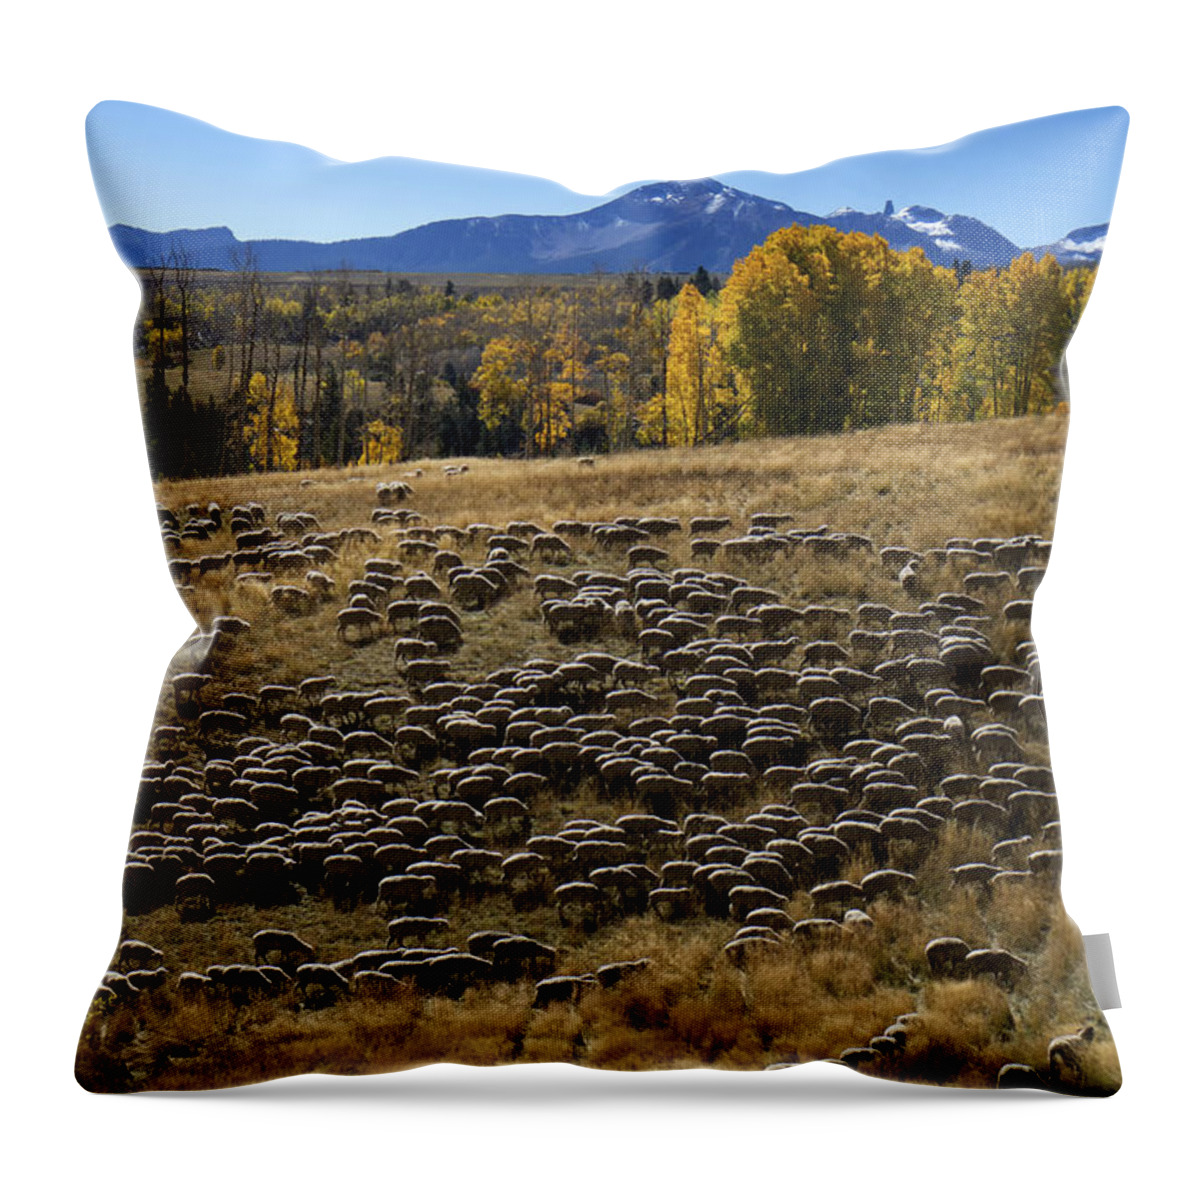 Sheep Throw Pillow featuring the photograph 1000 Sheep Above Telluride Colorado by Mary Lee Dereske